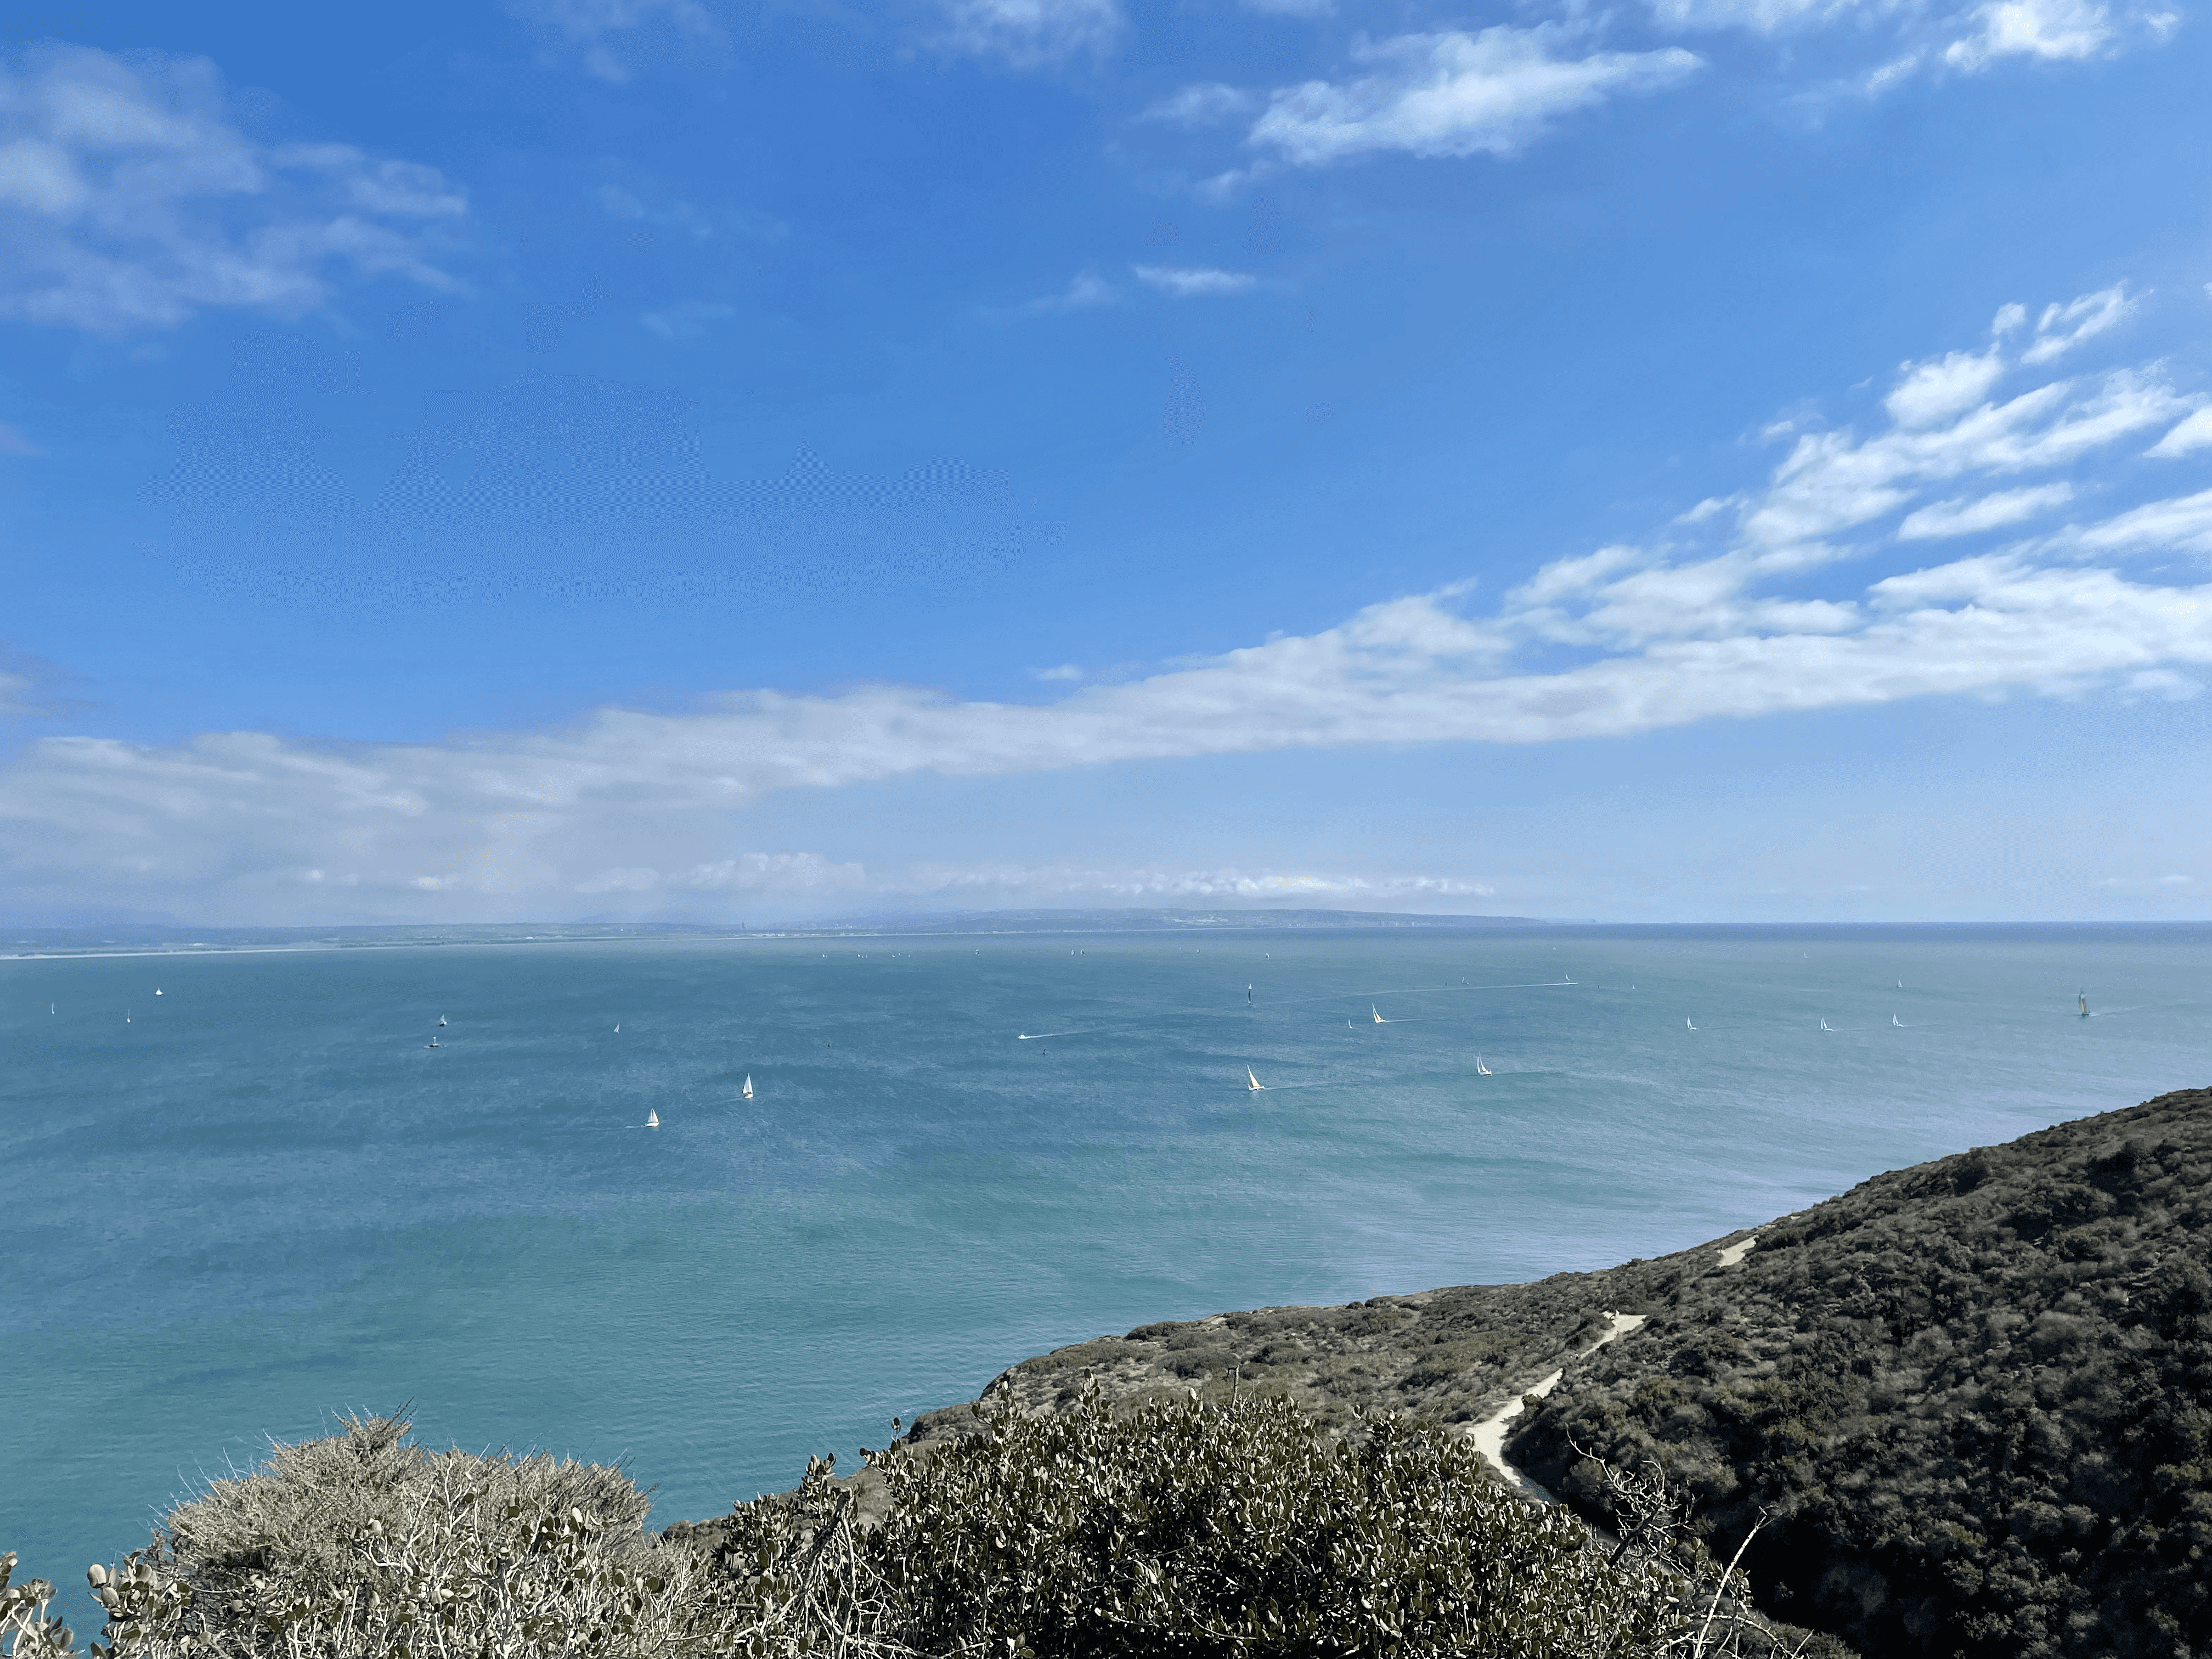 A view of sailboats on the Pacific Ocean from Cabrillo National Park